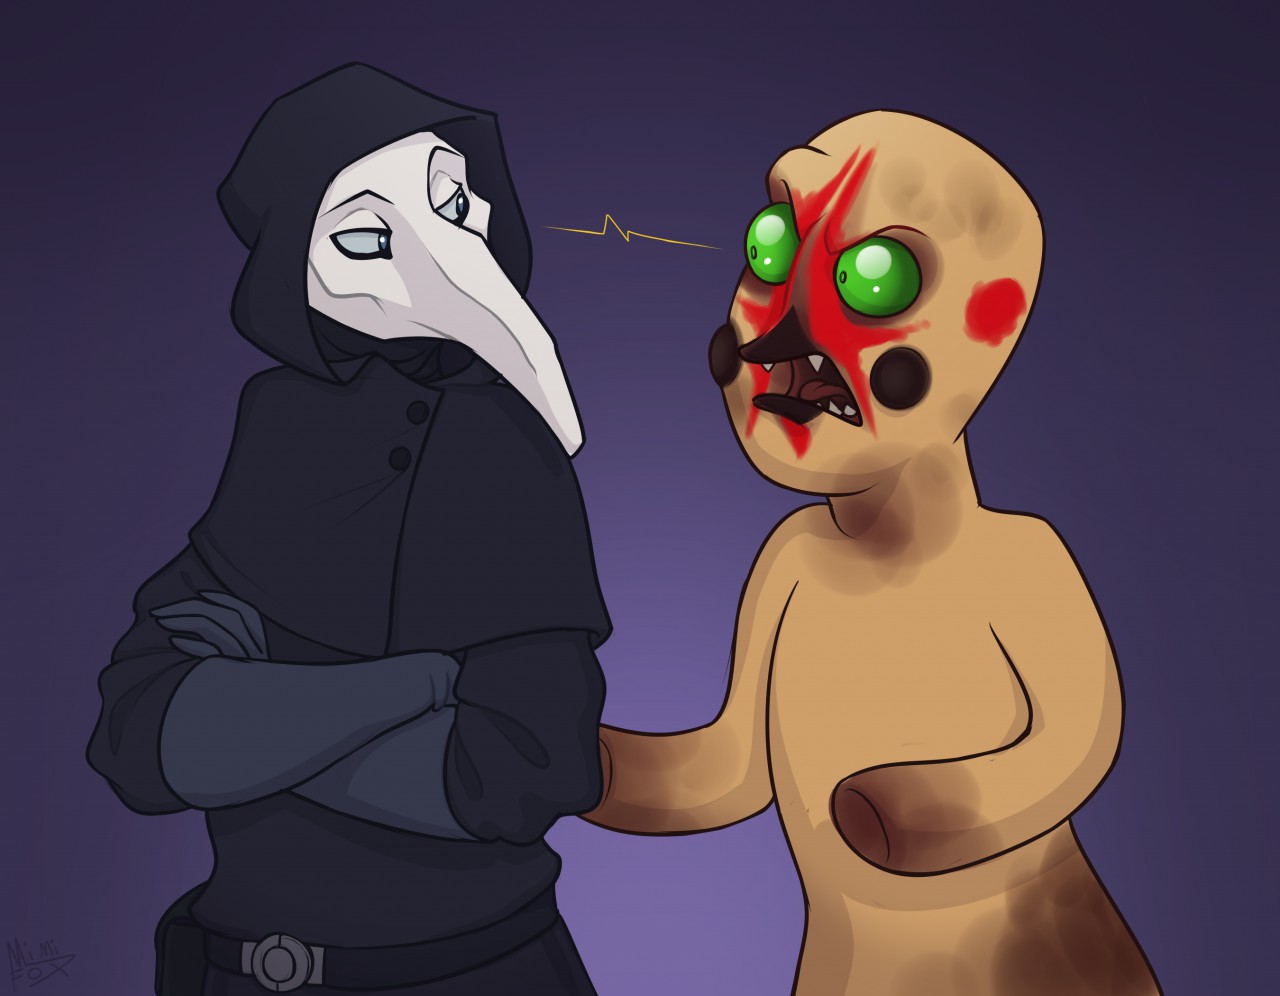 SCP-049 and SCP-173. 